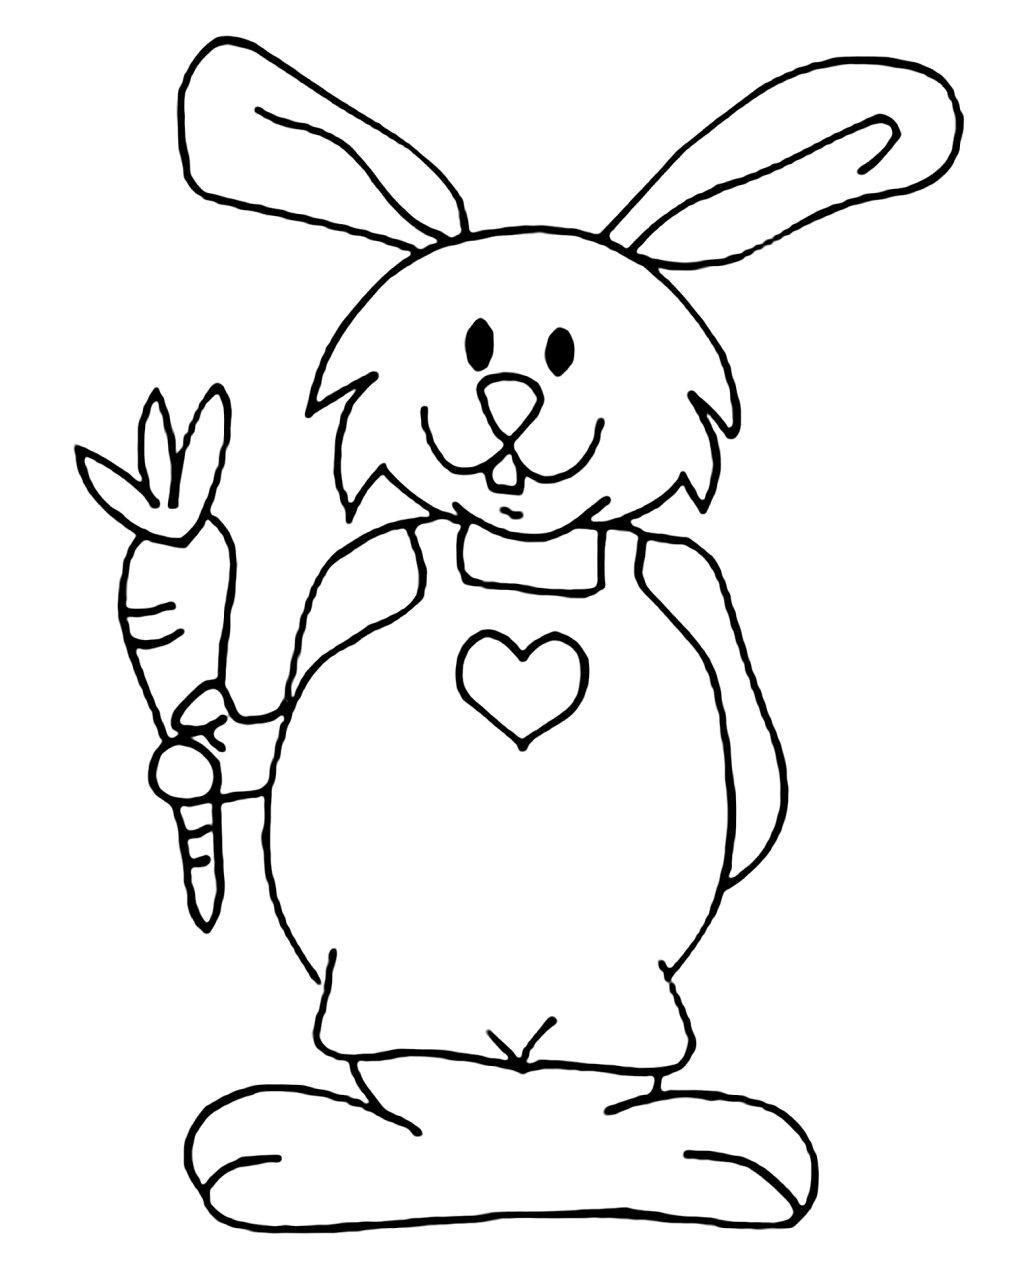 Rabbit to color for kids Rabbit Kids Coloring Pages